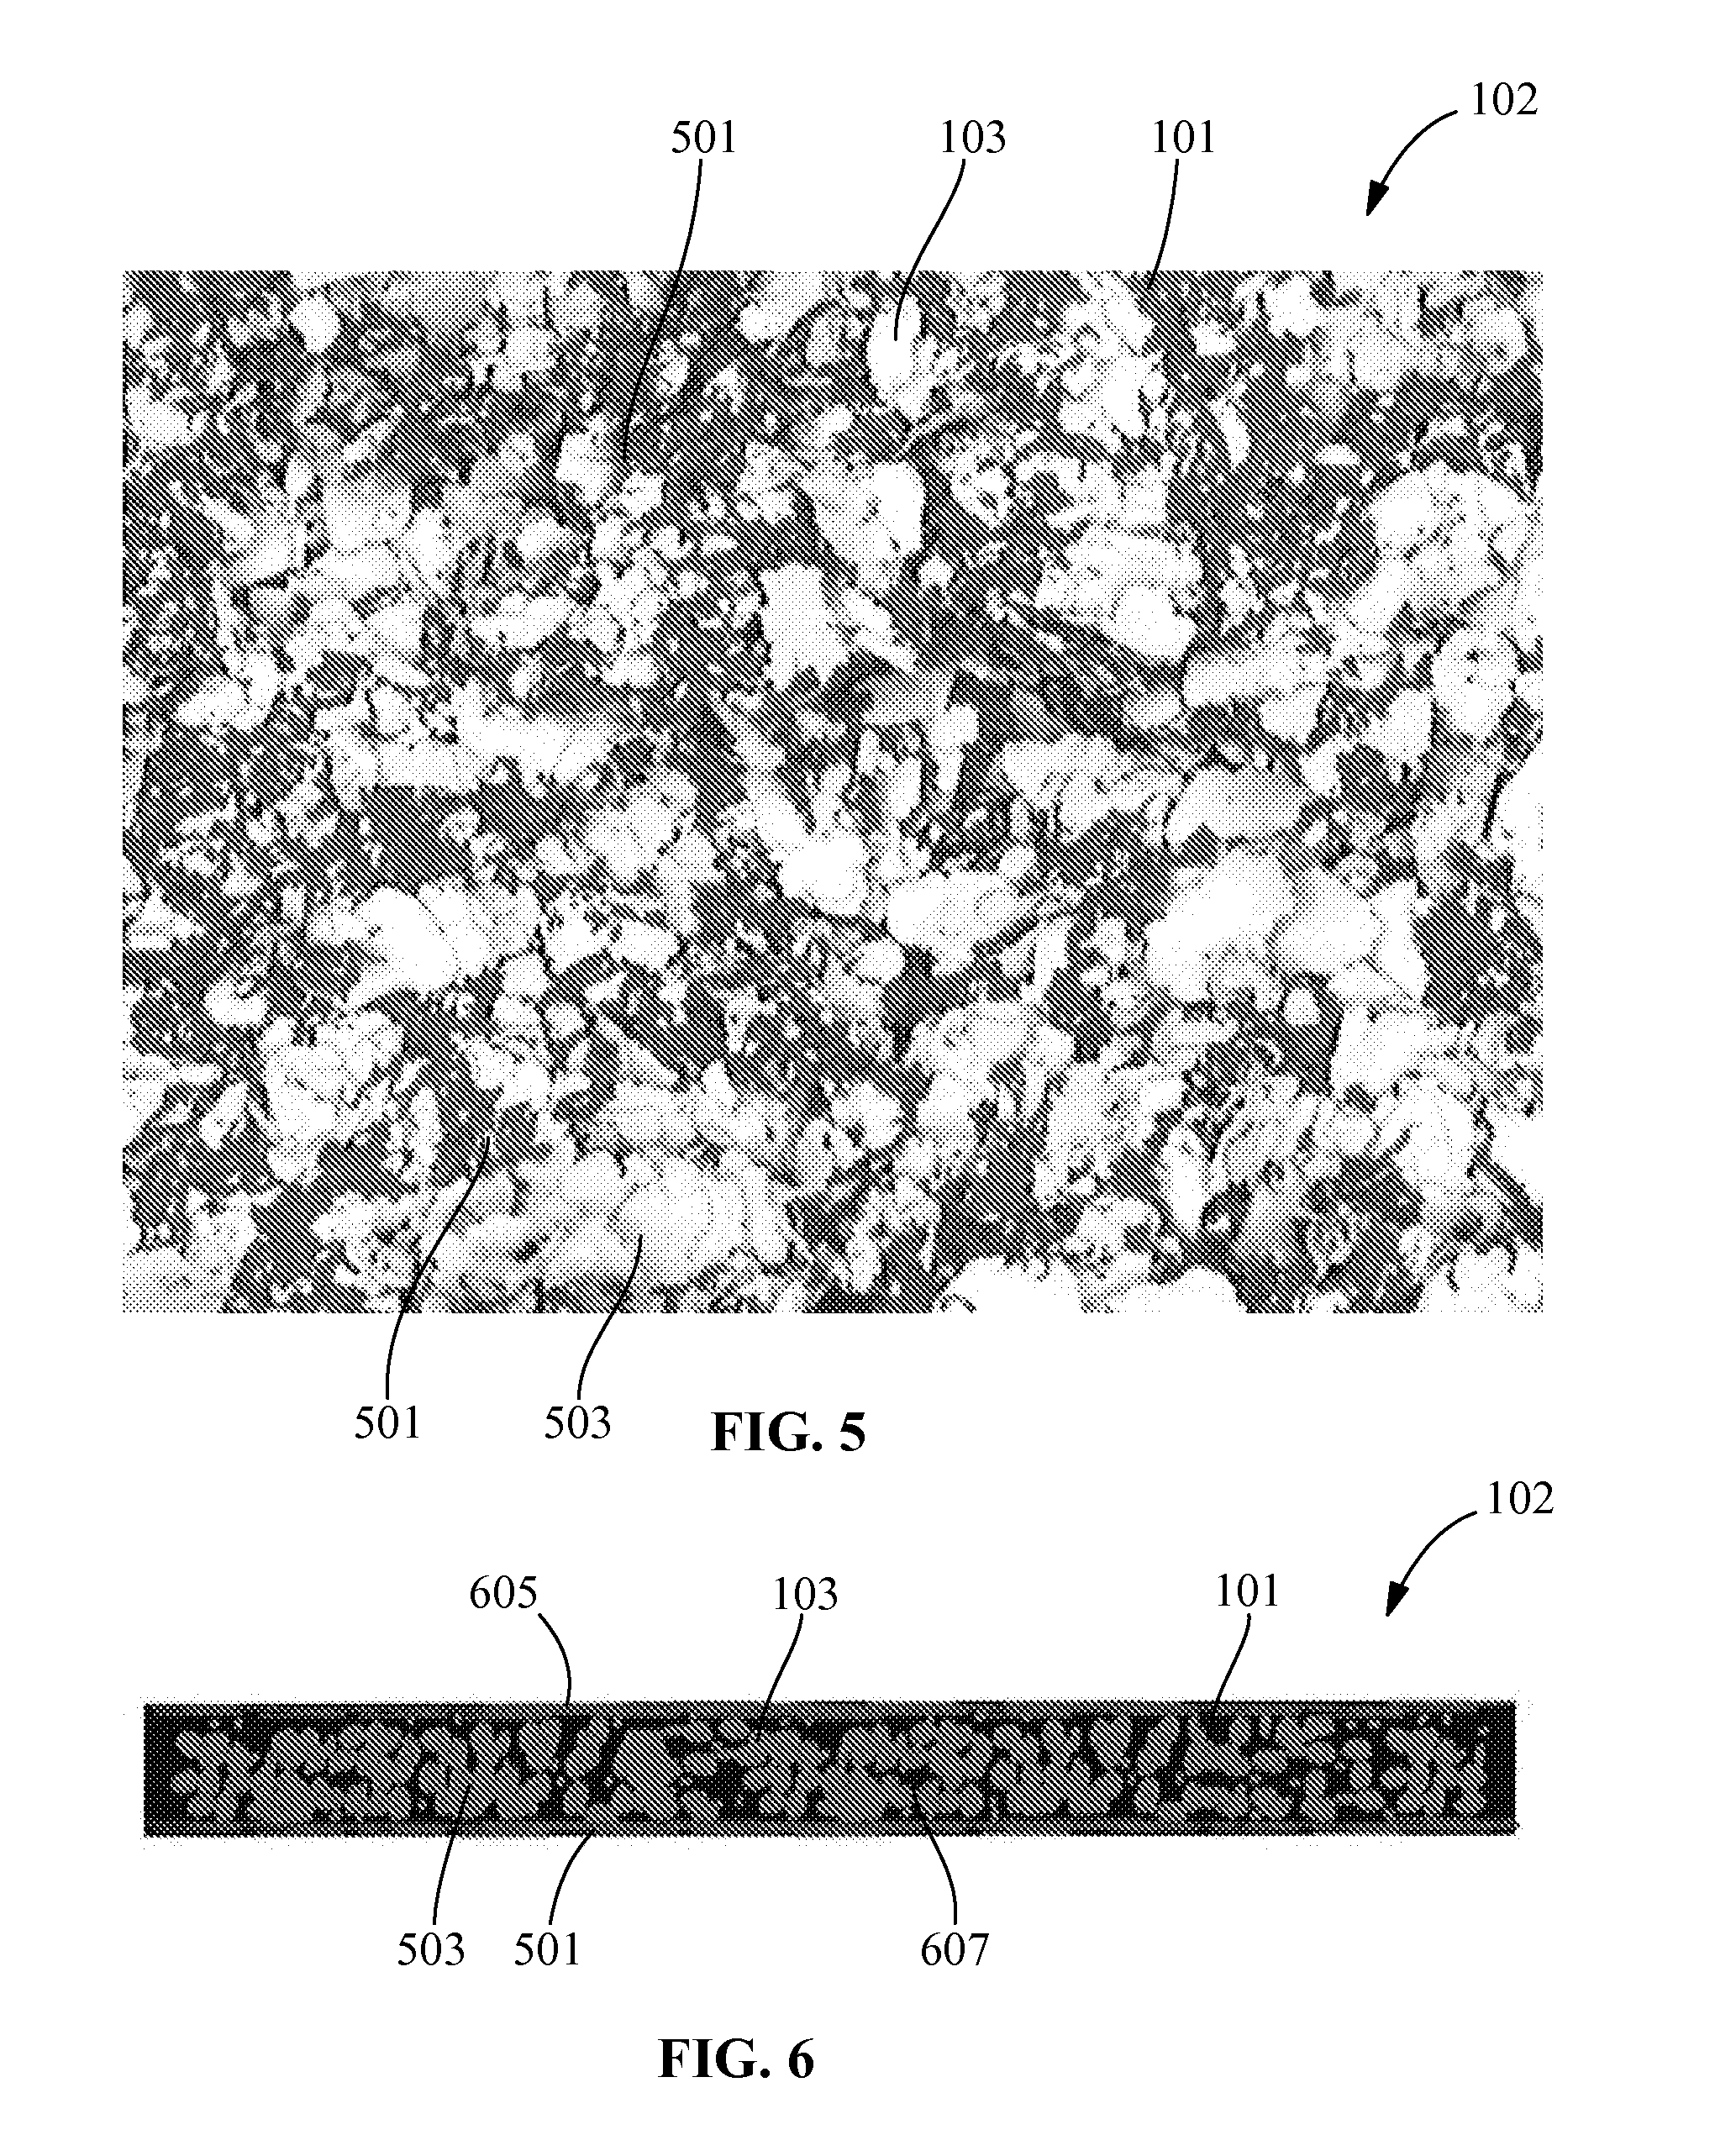 Composite Formulation and Electronic Component